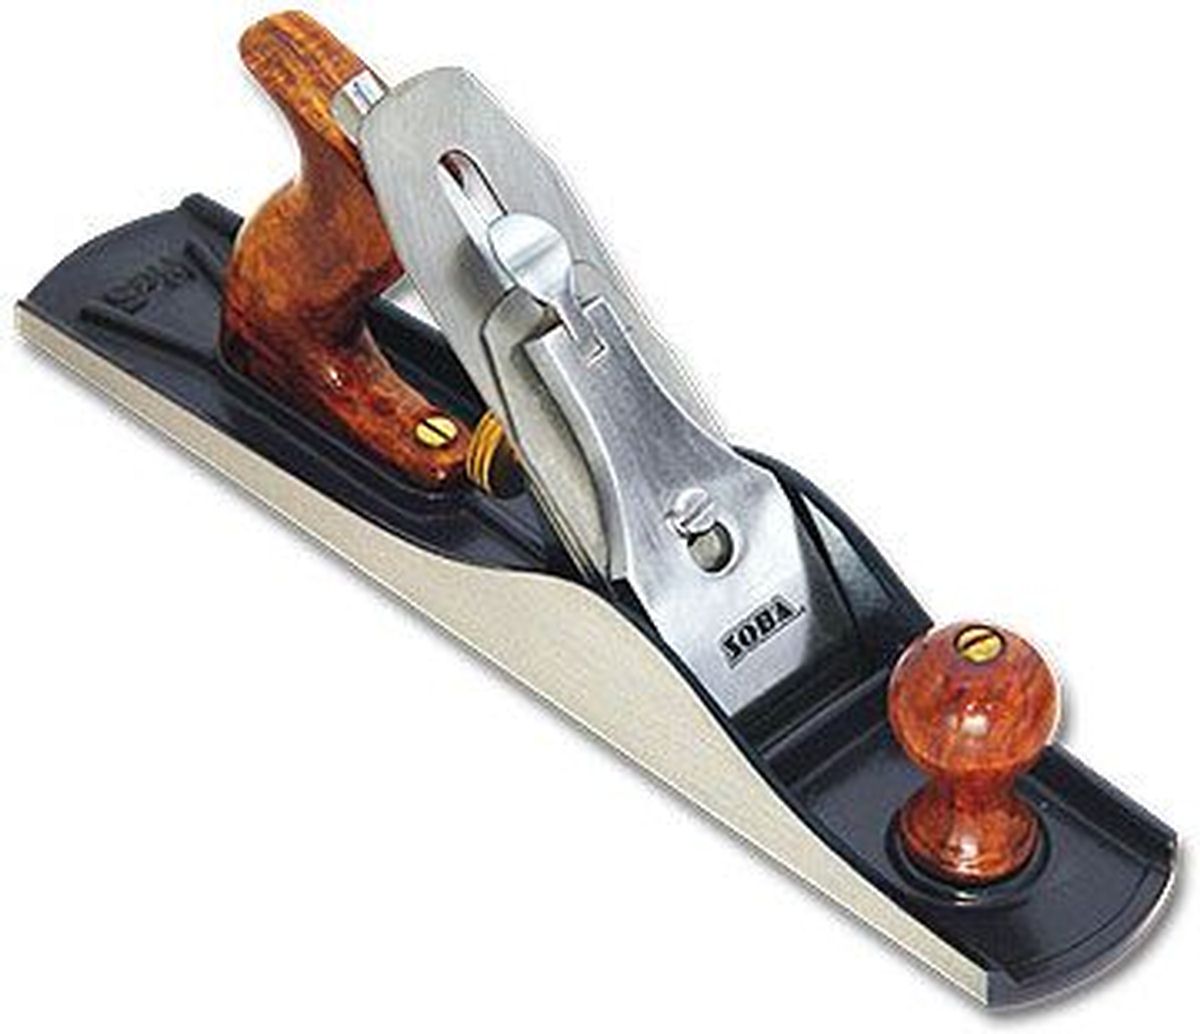 Soba Smoothing Woodworking Plane No 4 10″ 150 mm From Chronos 